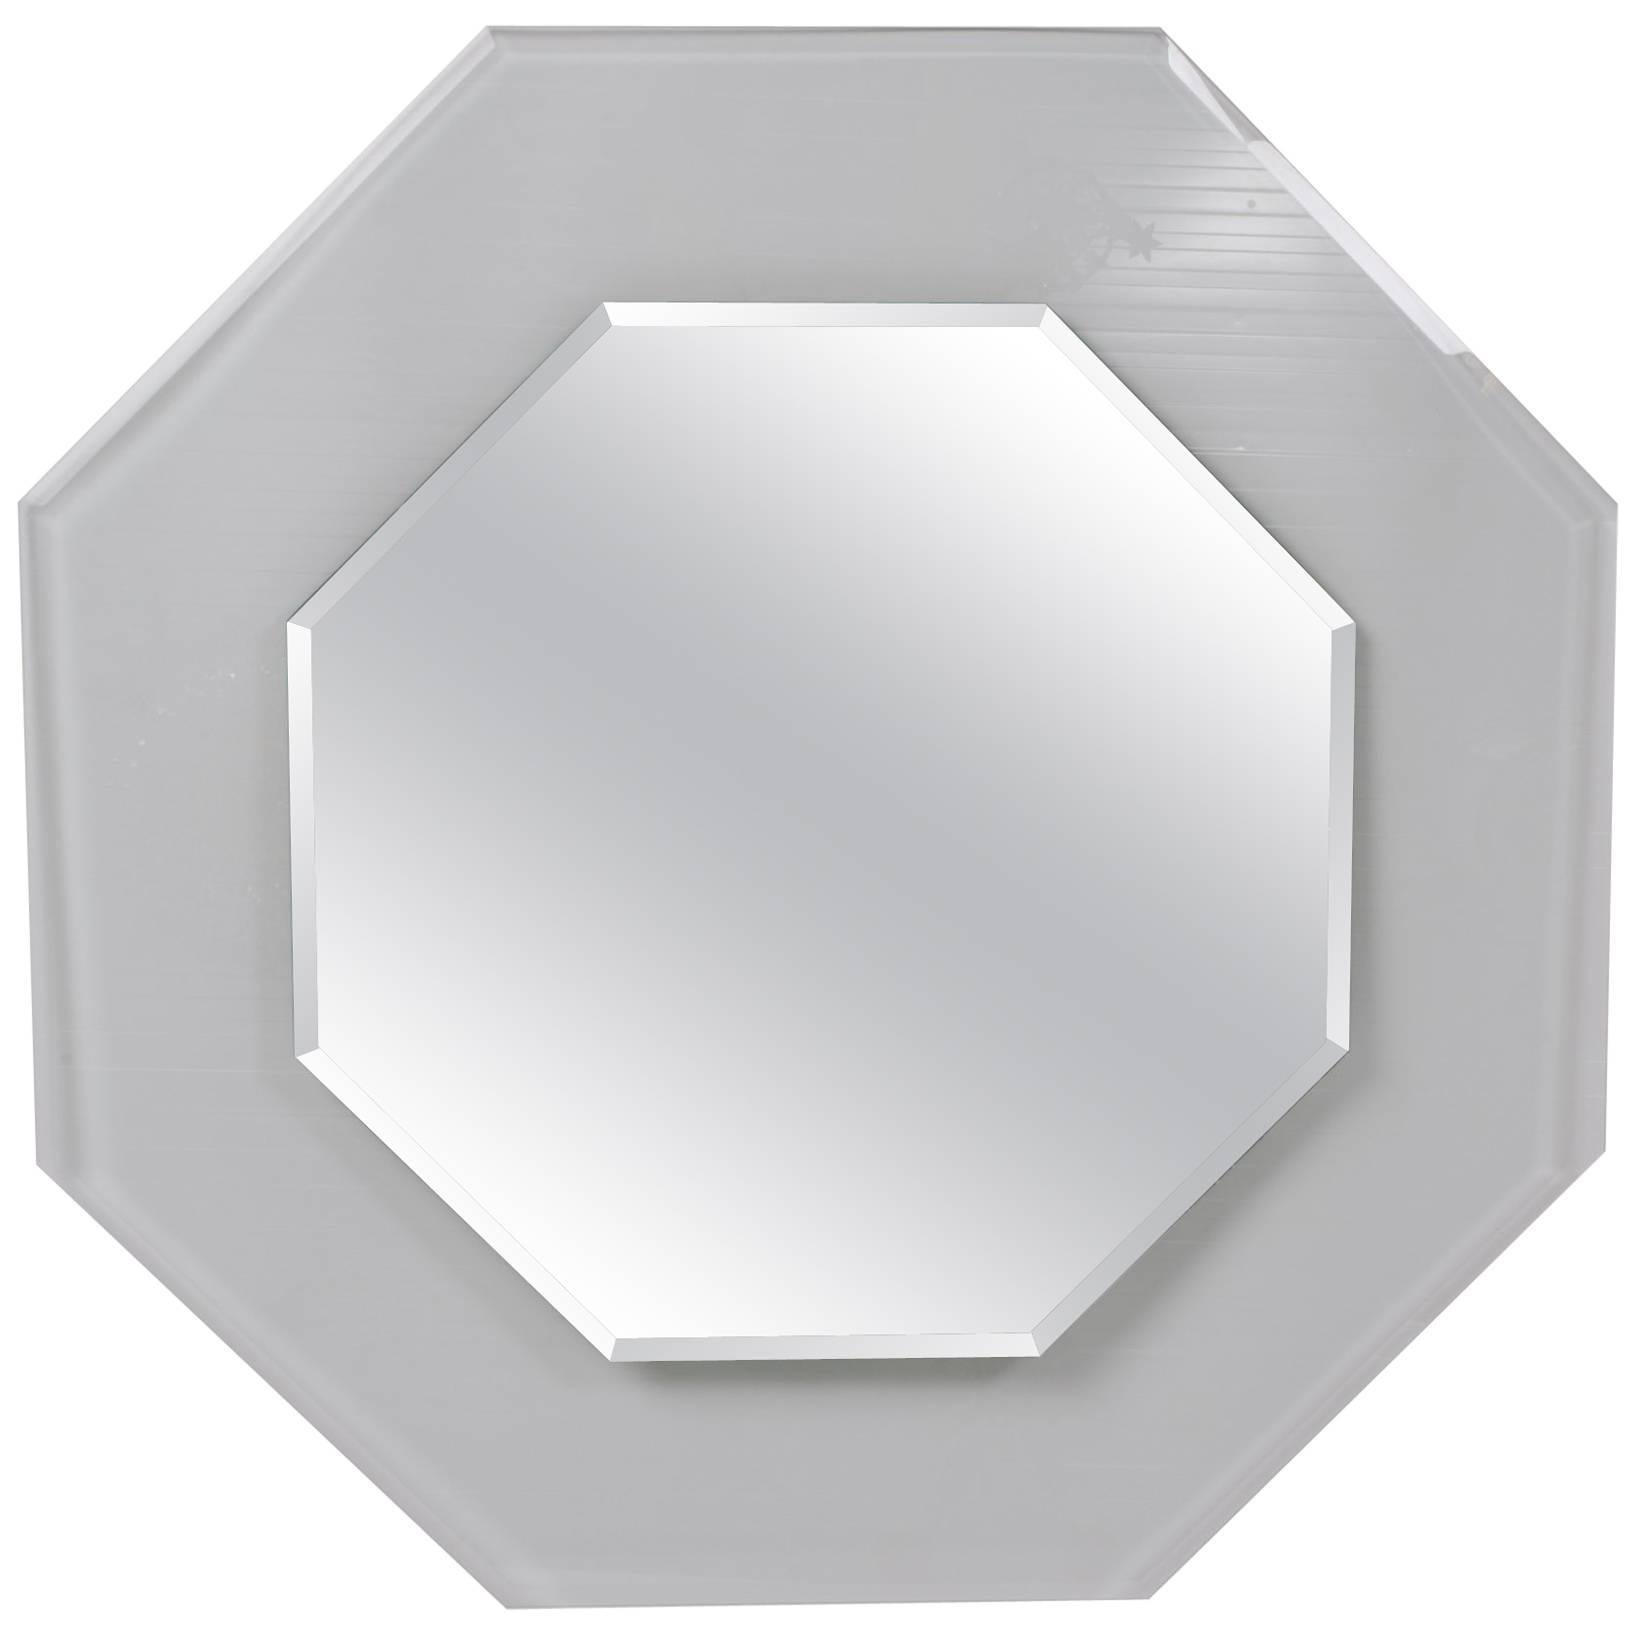 1970s Octagonal Beveled Glass Mirror For Sale